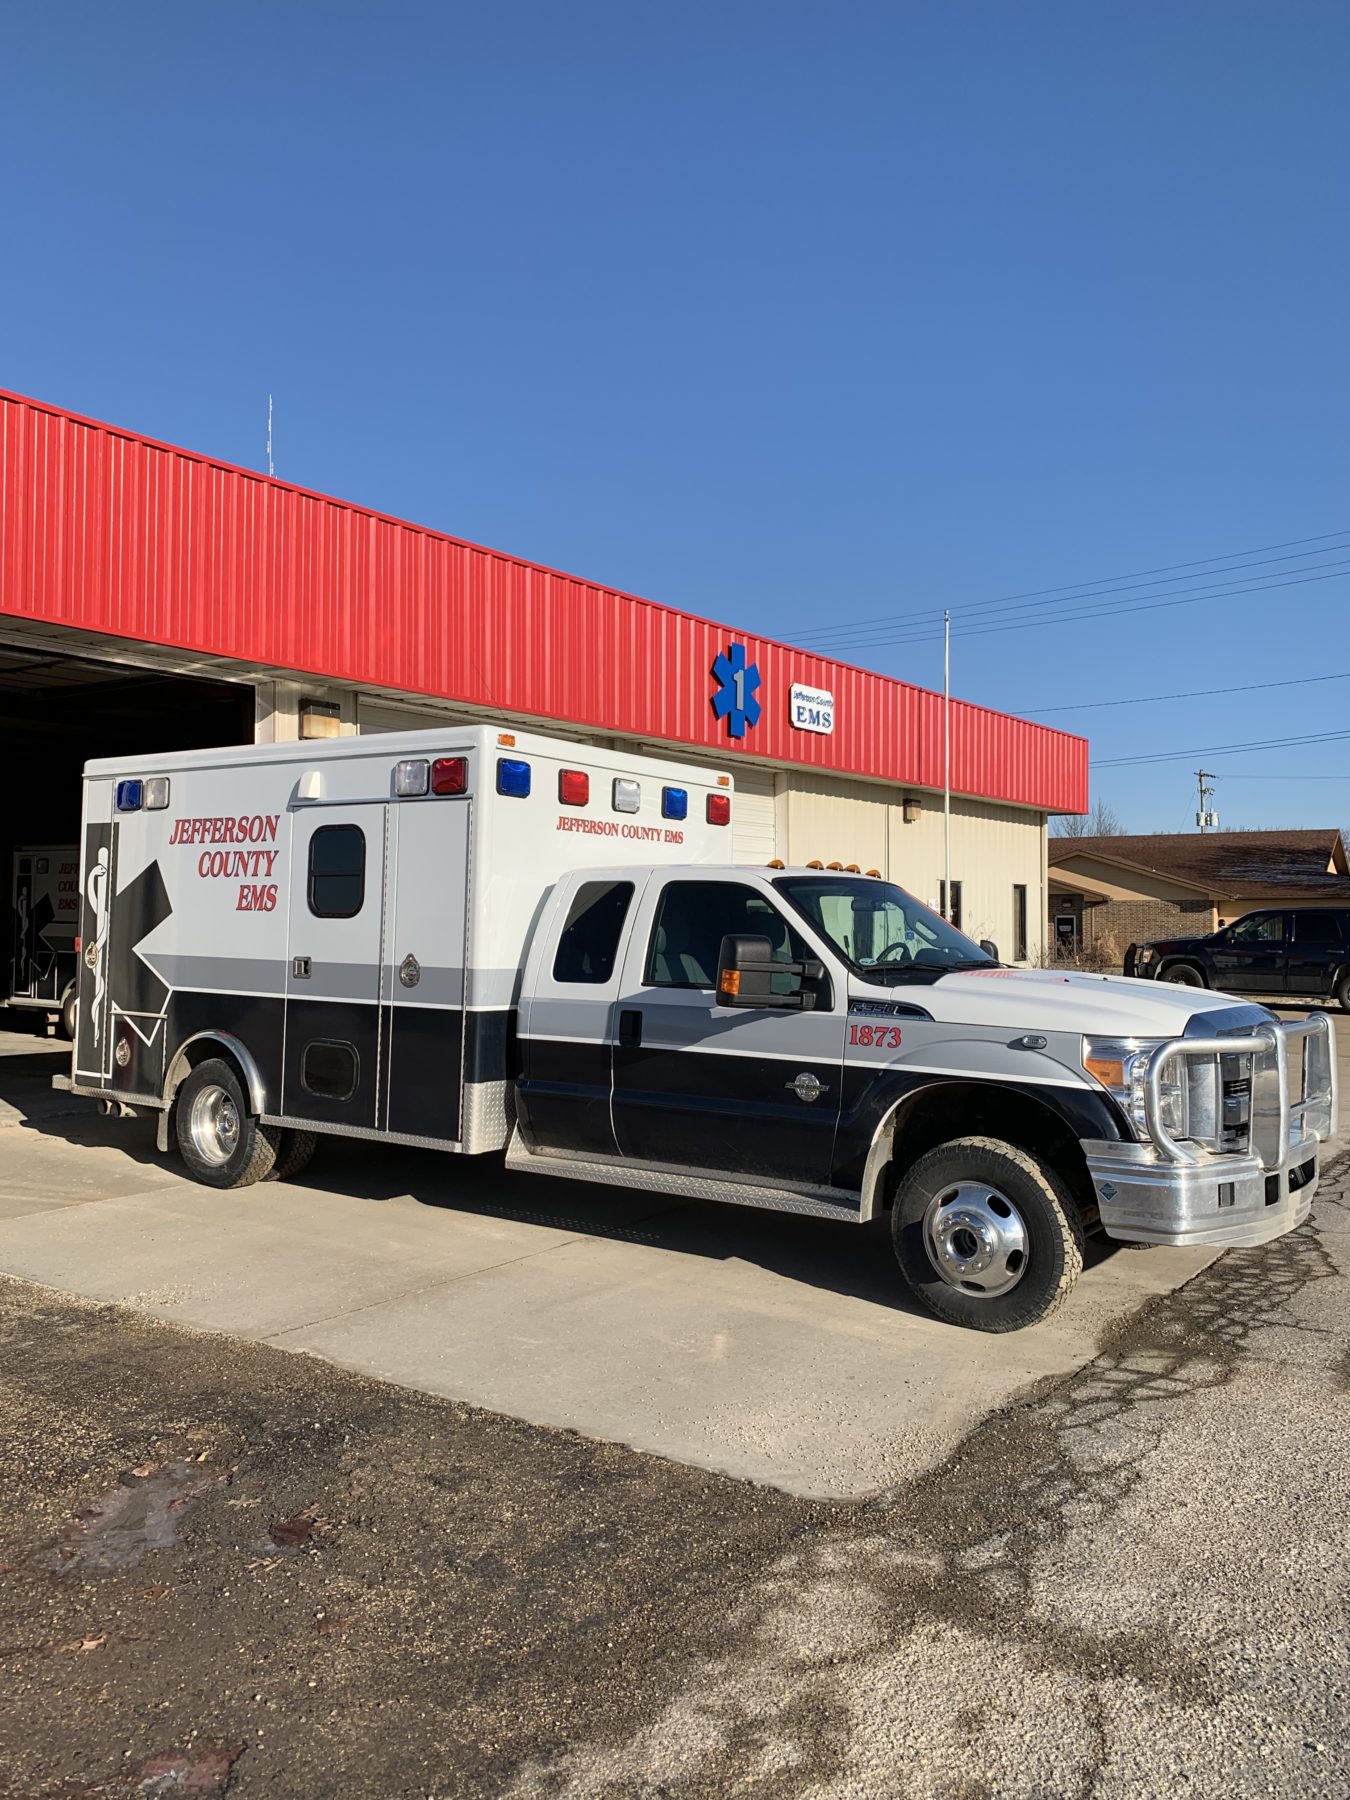 2013 Ford F350 4x4 Type 1 Ambulance For Sale – Picture 1